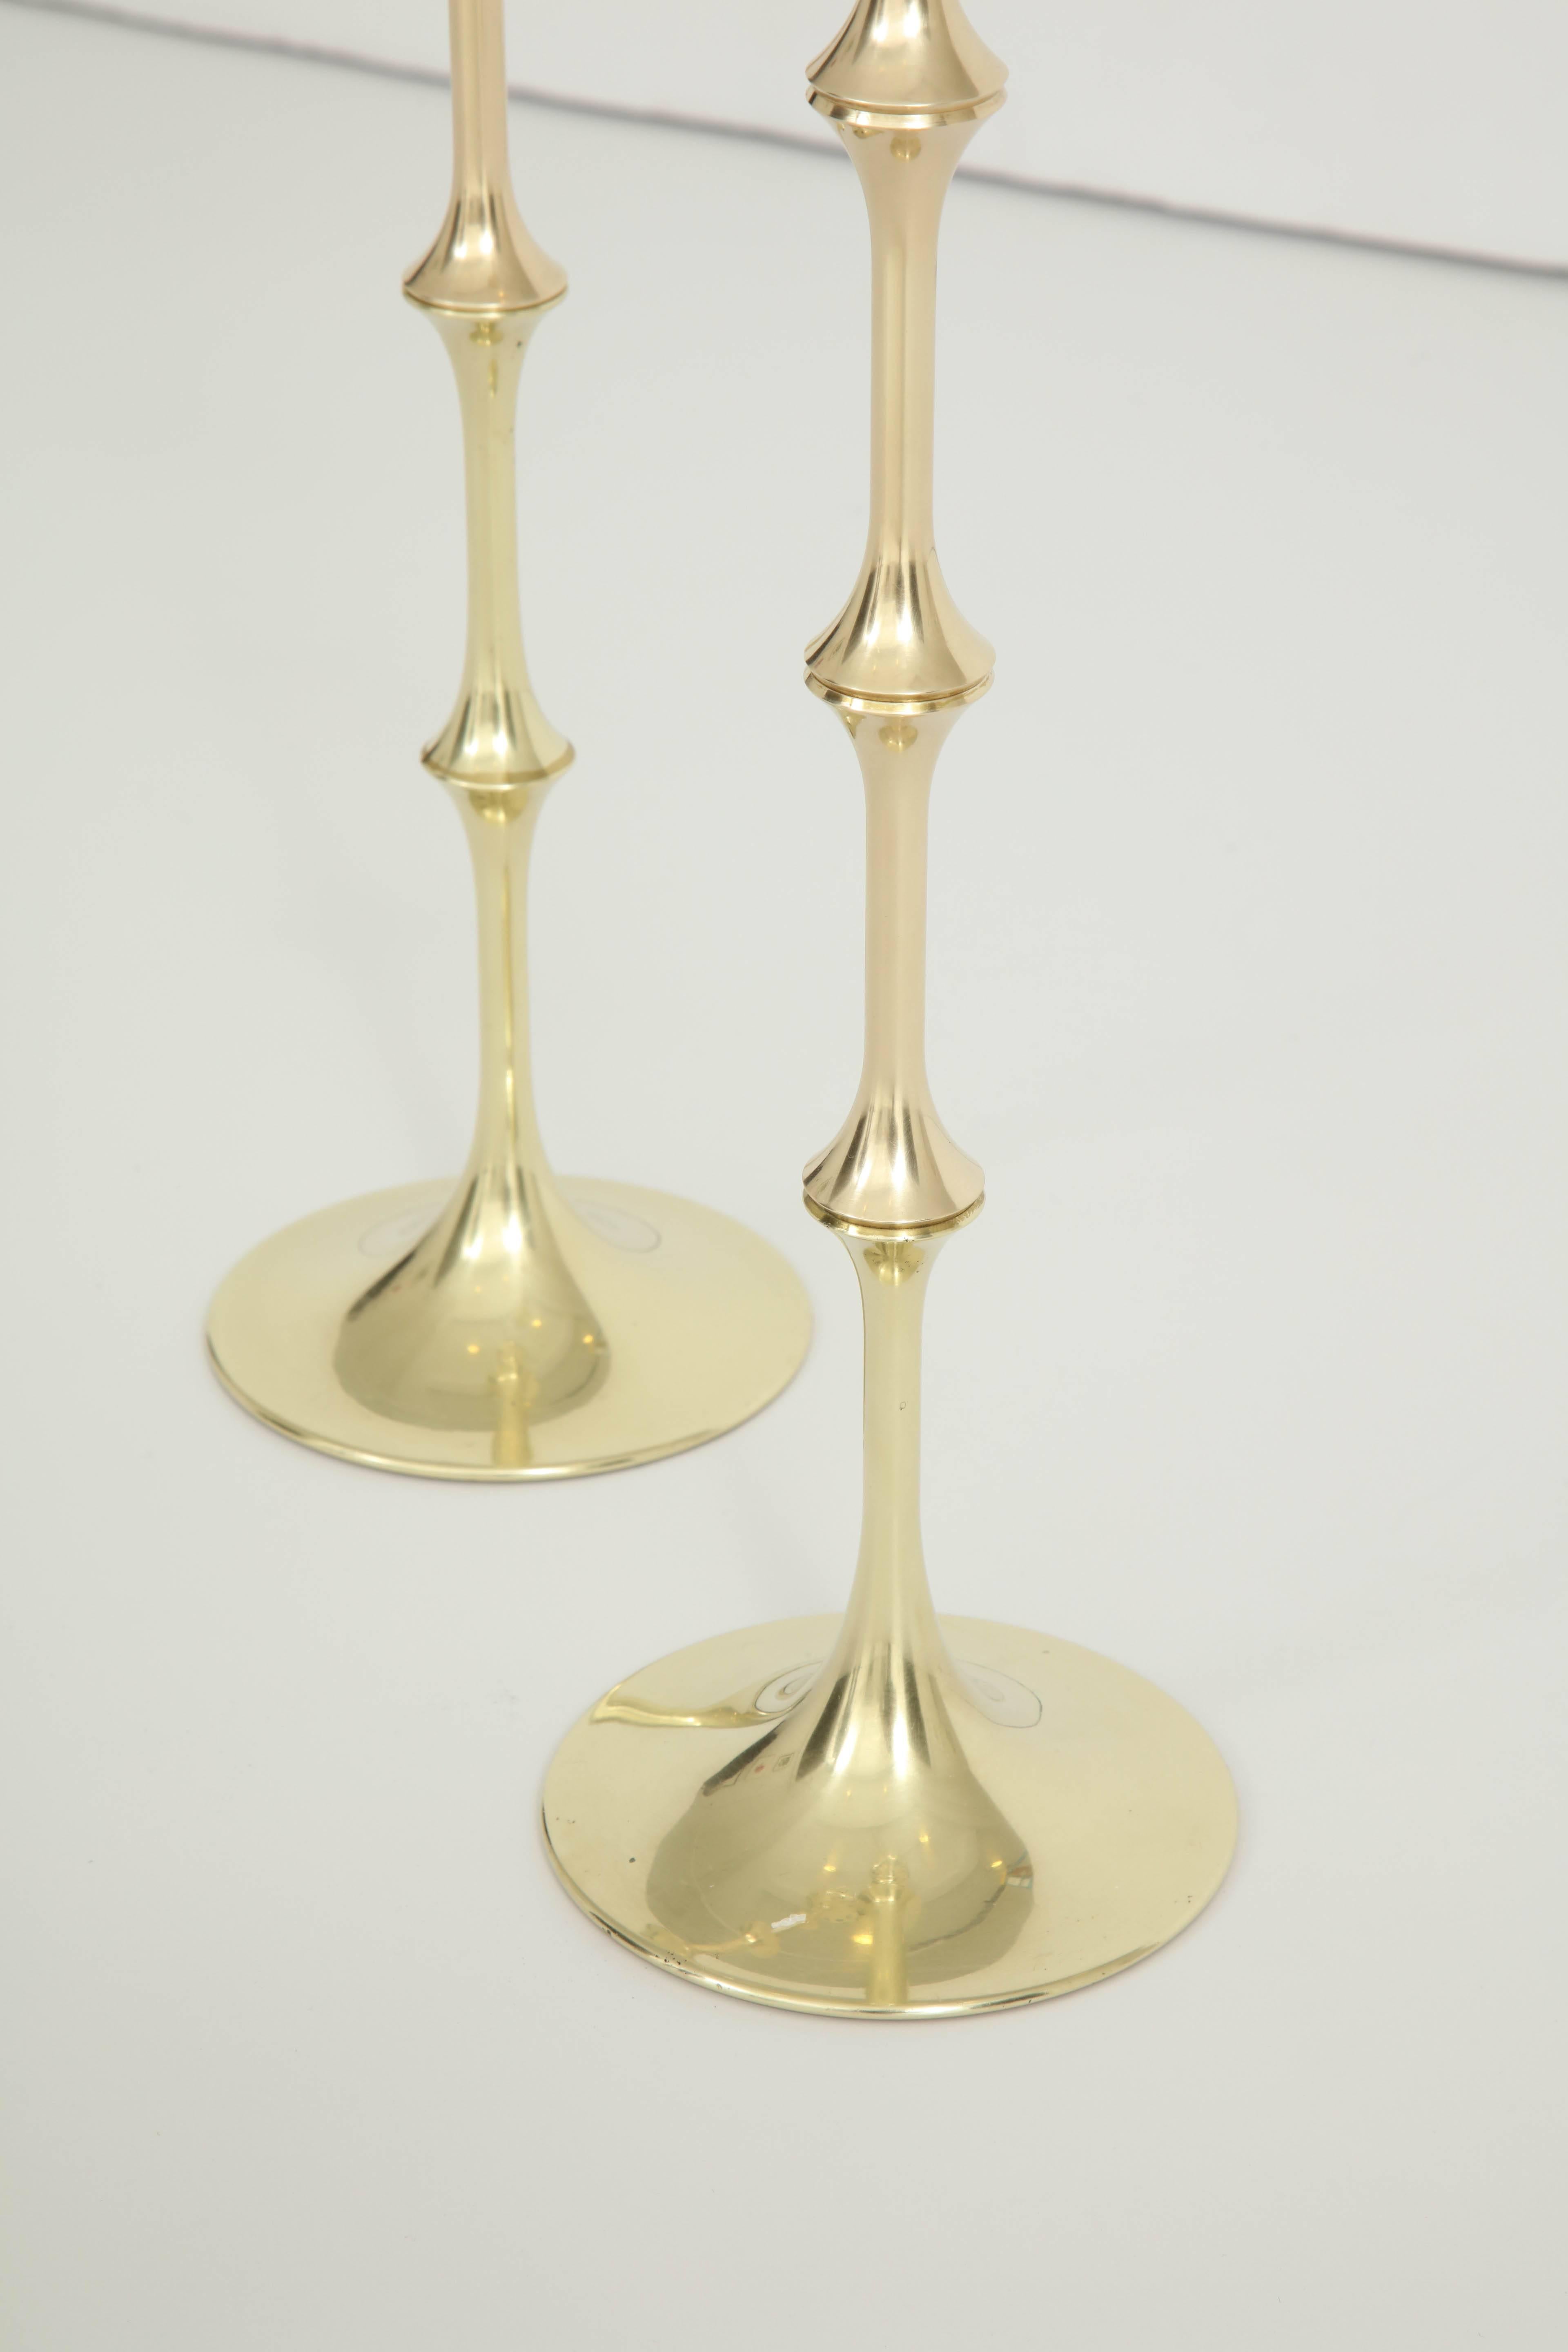 Late 20th Century Pair of Bjorn Wiinblad Brass and Glass Candlesticks, circa 1980s